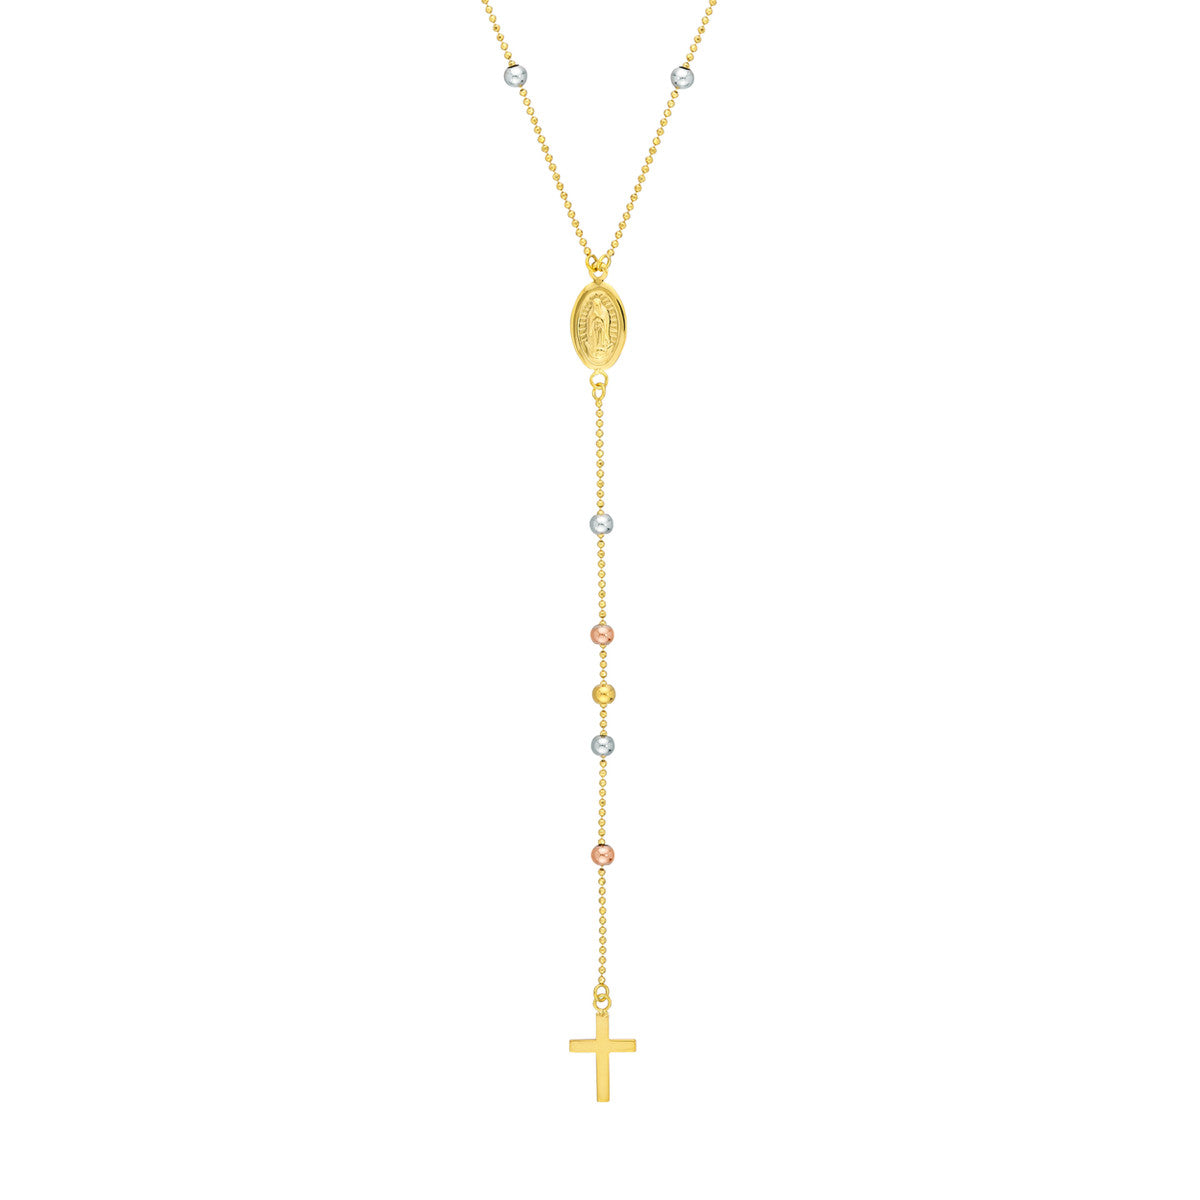 Children's Virgin Mary with Cross Beaded Y-Necklace $272